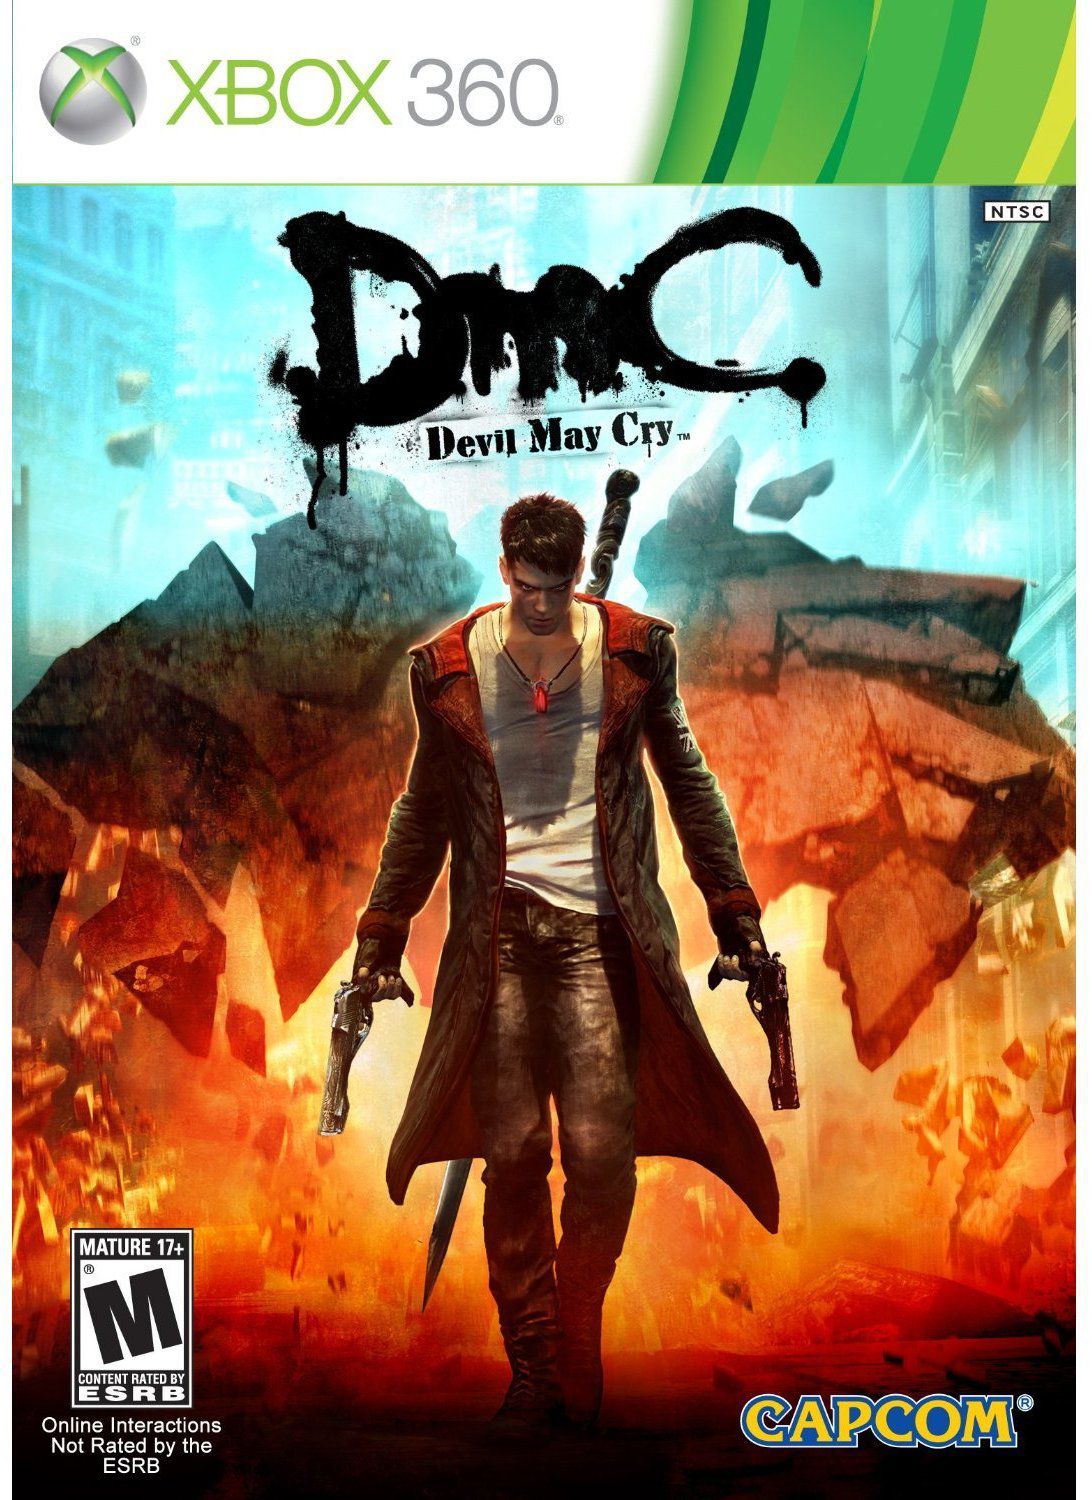 DmC: Devil May Cry - Complete Edition-PROPHET [Action | 2014]